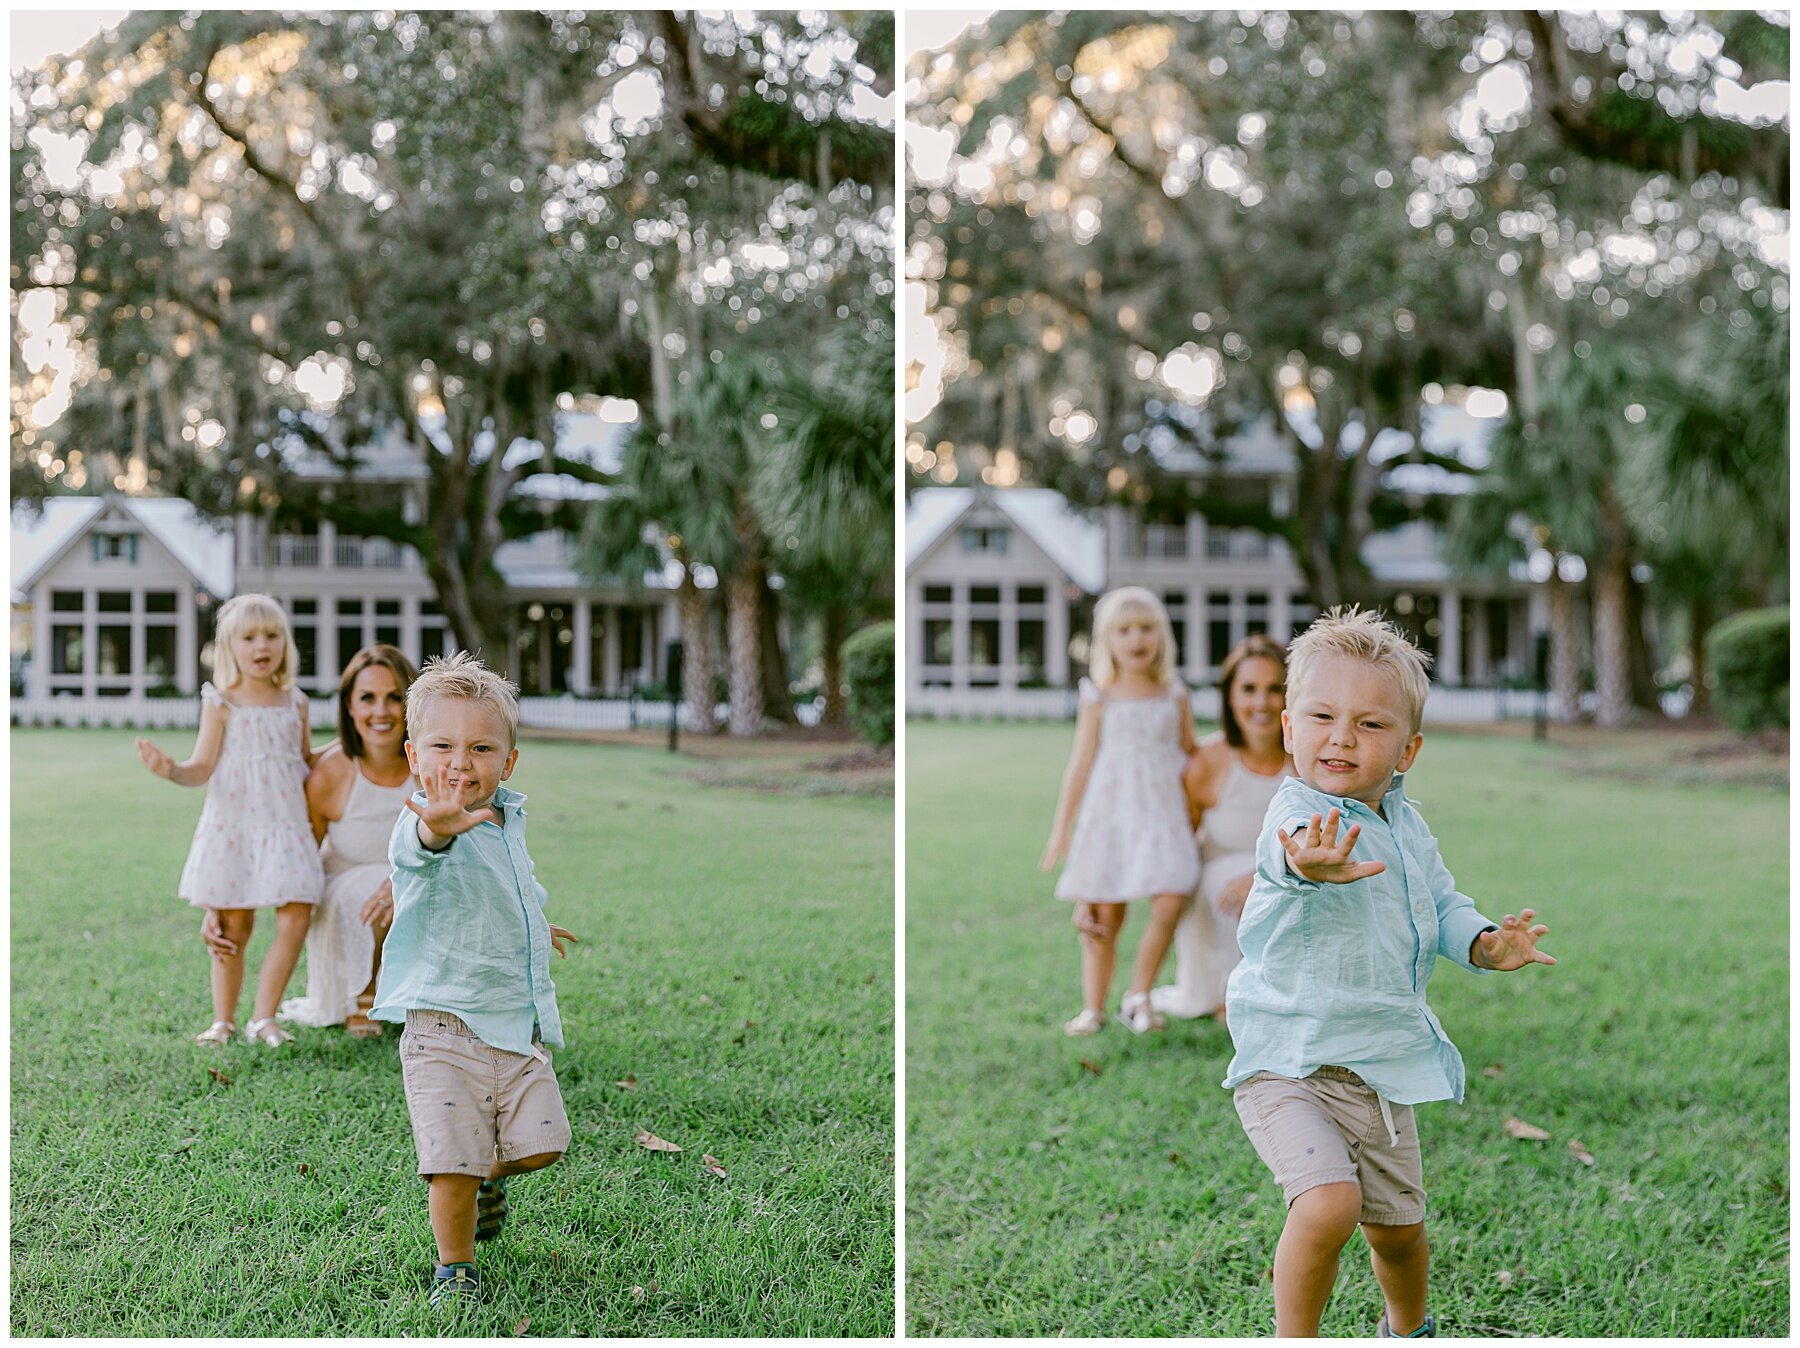 Katherine_Ives_Photography_Mcmillen_Montage_Palmetto_Bluff_43.jpg